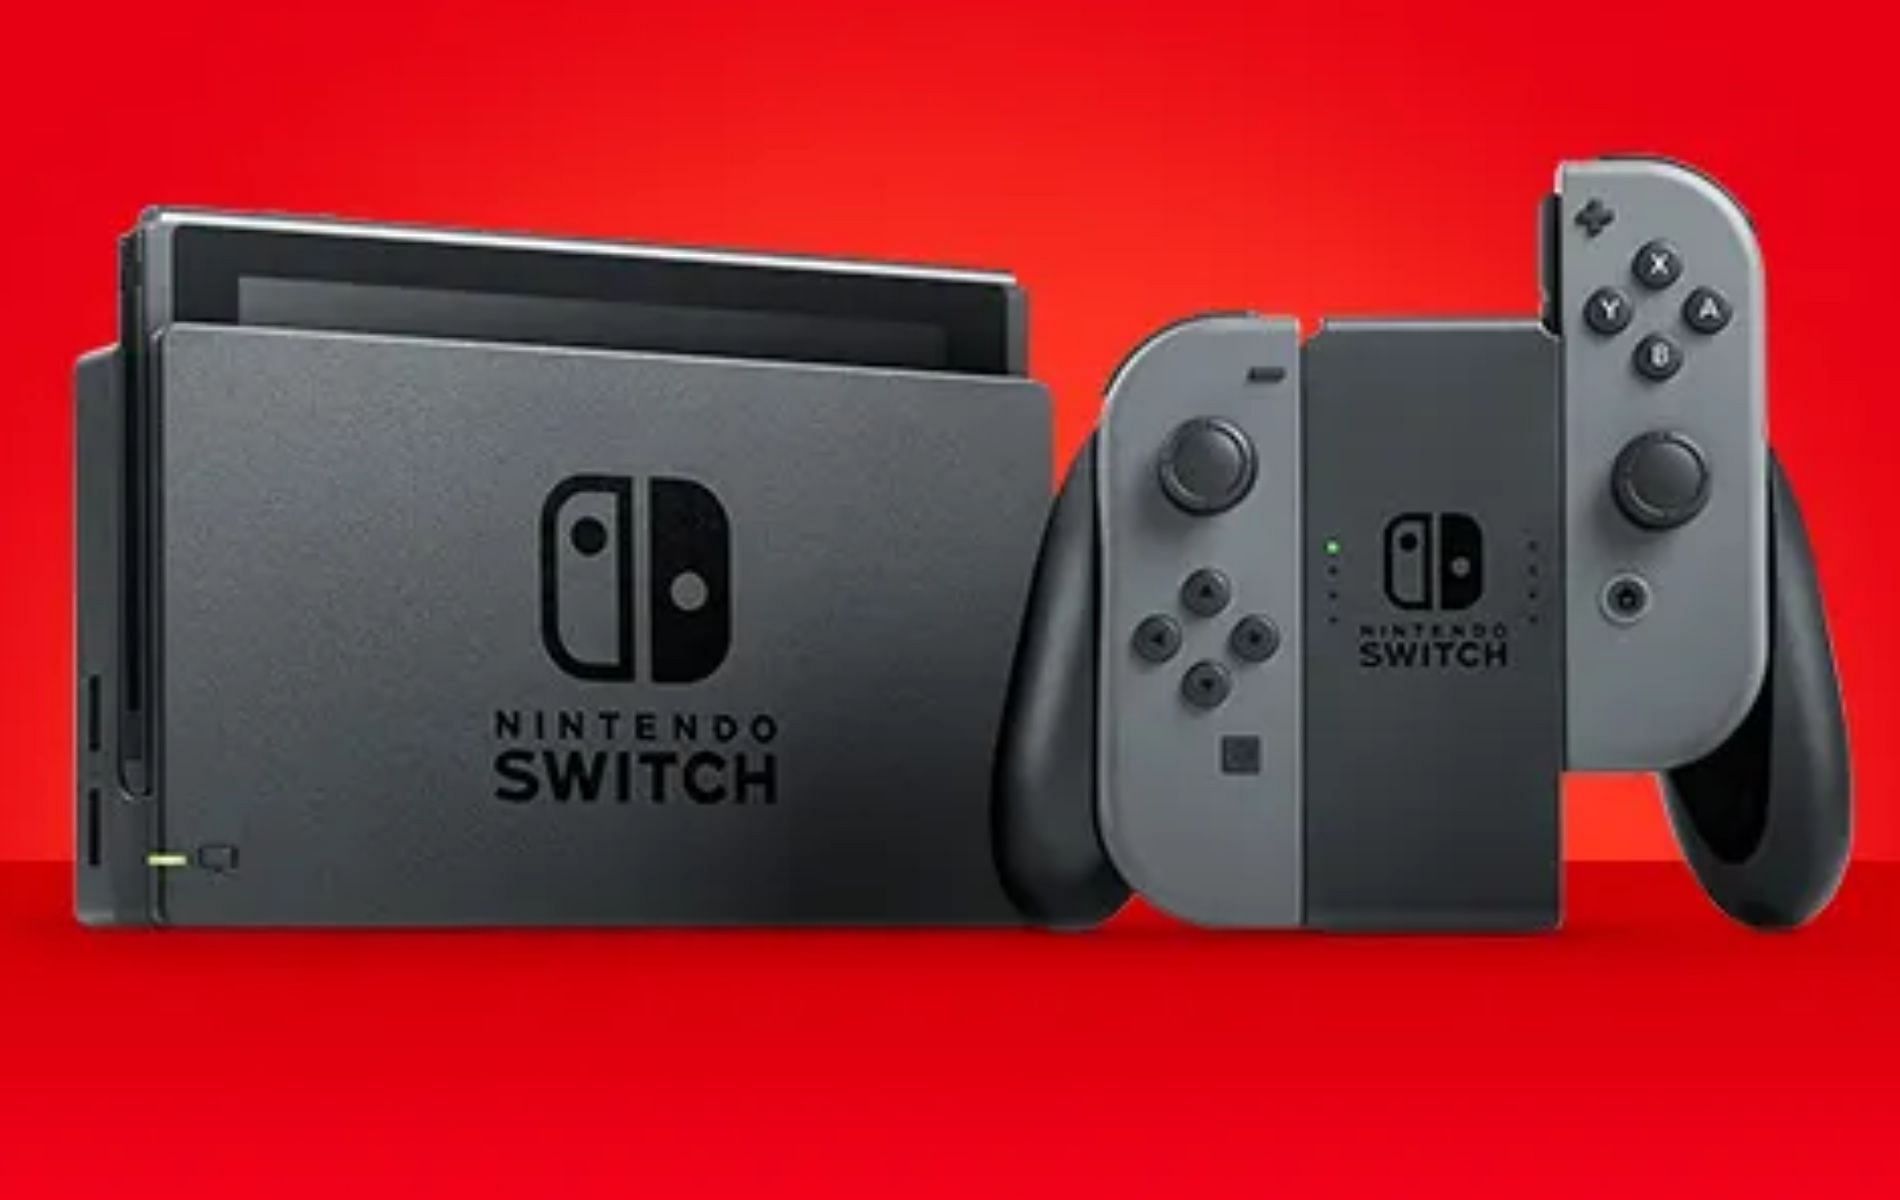 Official promotional art for Nintendo Switch by Nintendo